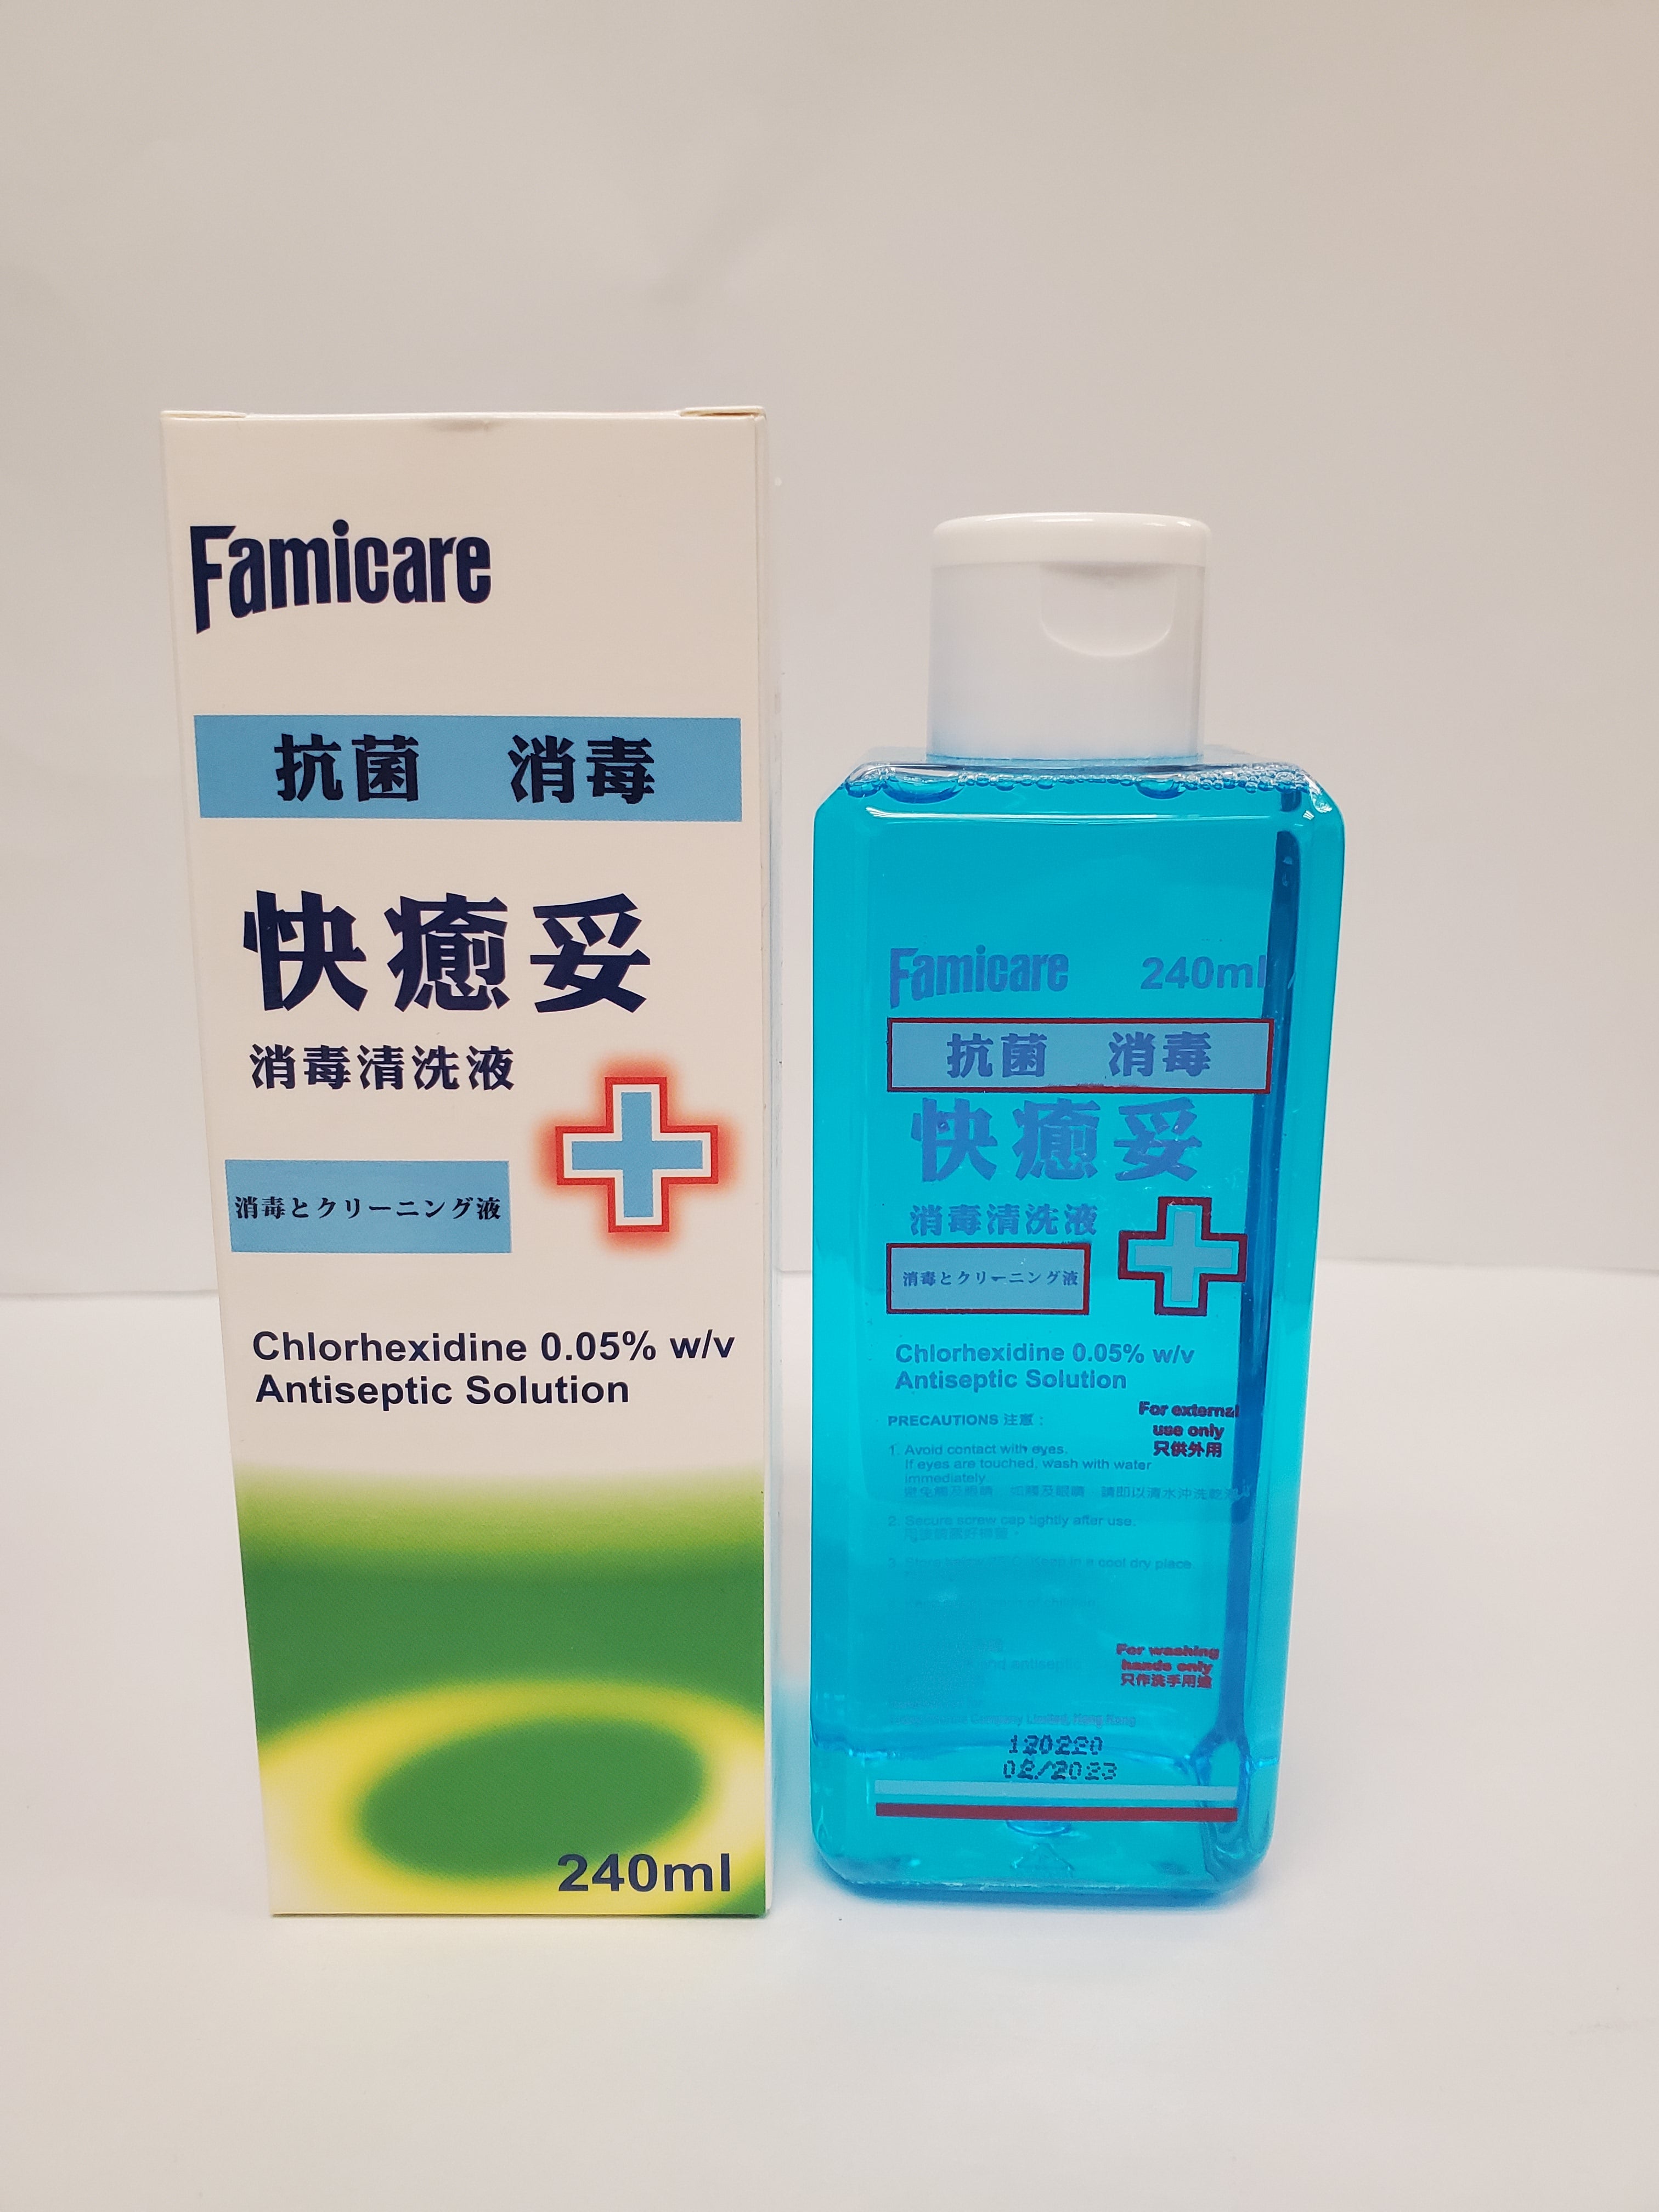 Famicare Antiseptic Solution 240mL